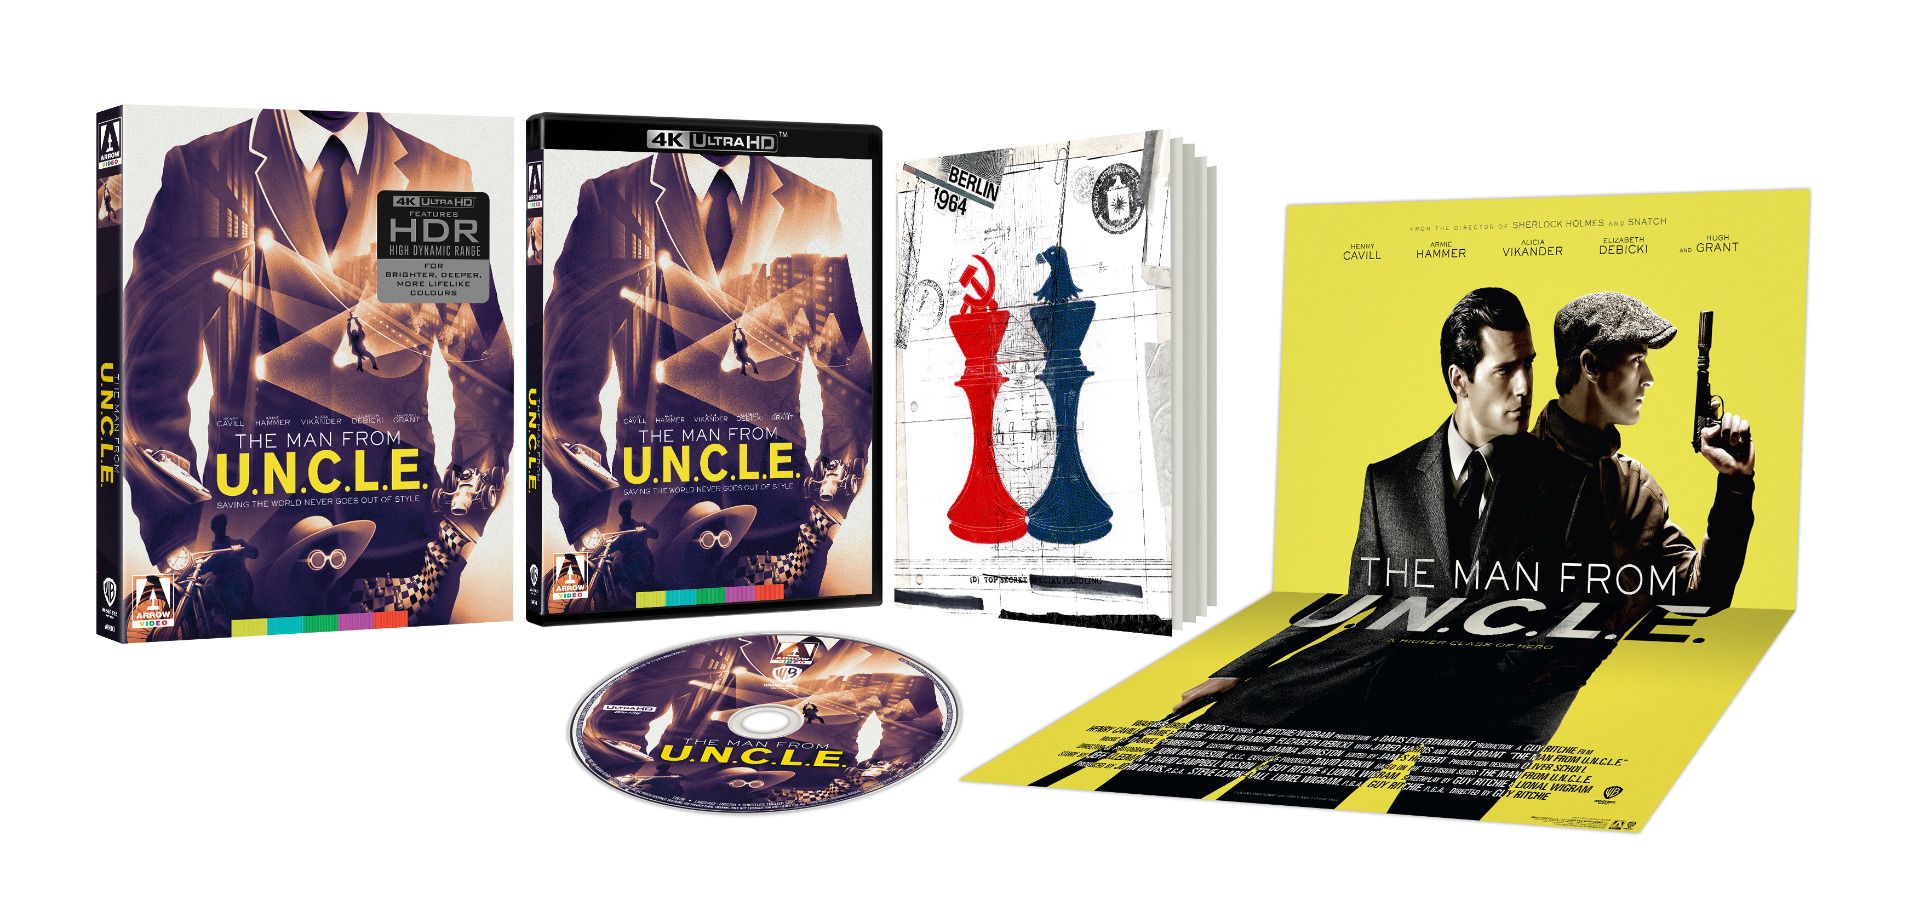 themanfromuncle_exploded_pack-uhd1-us.jpg